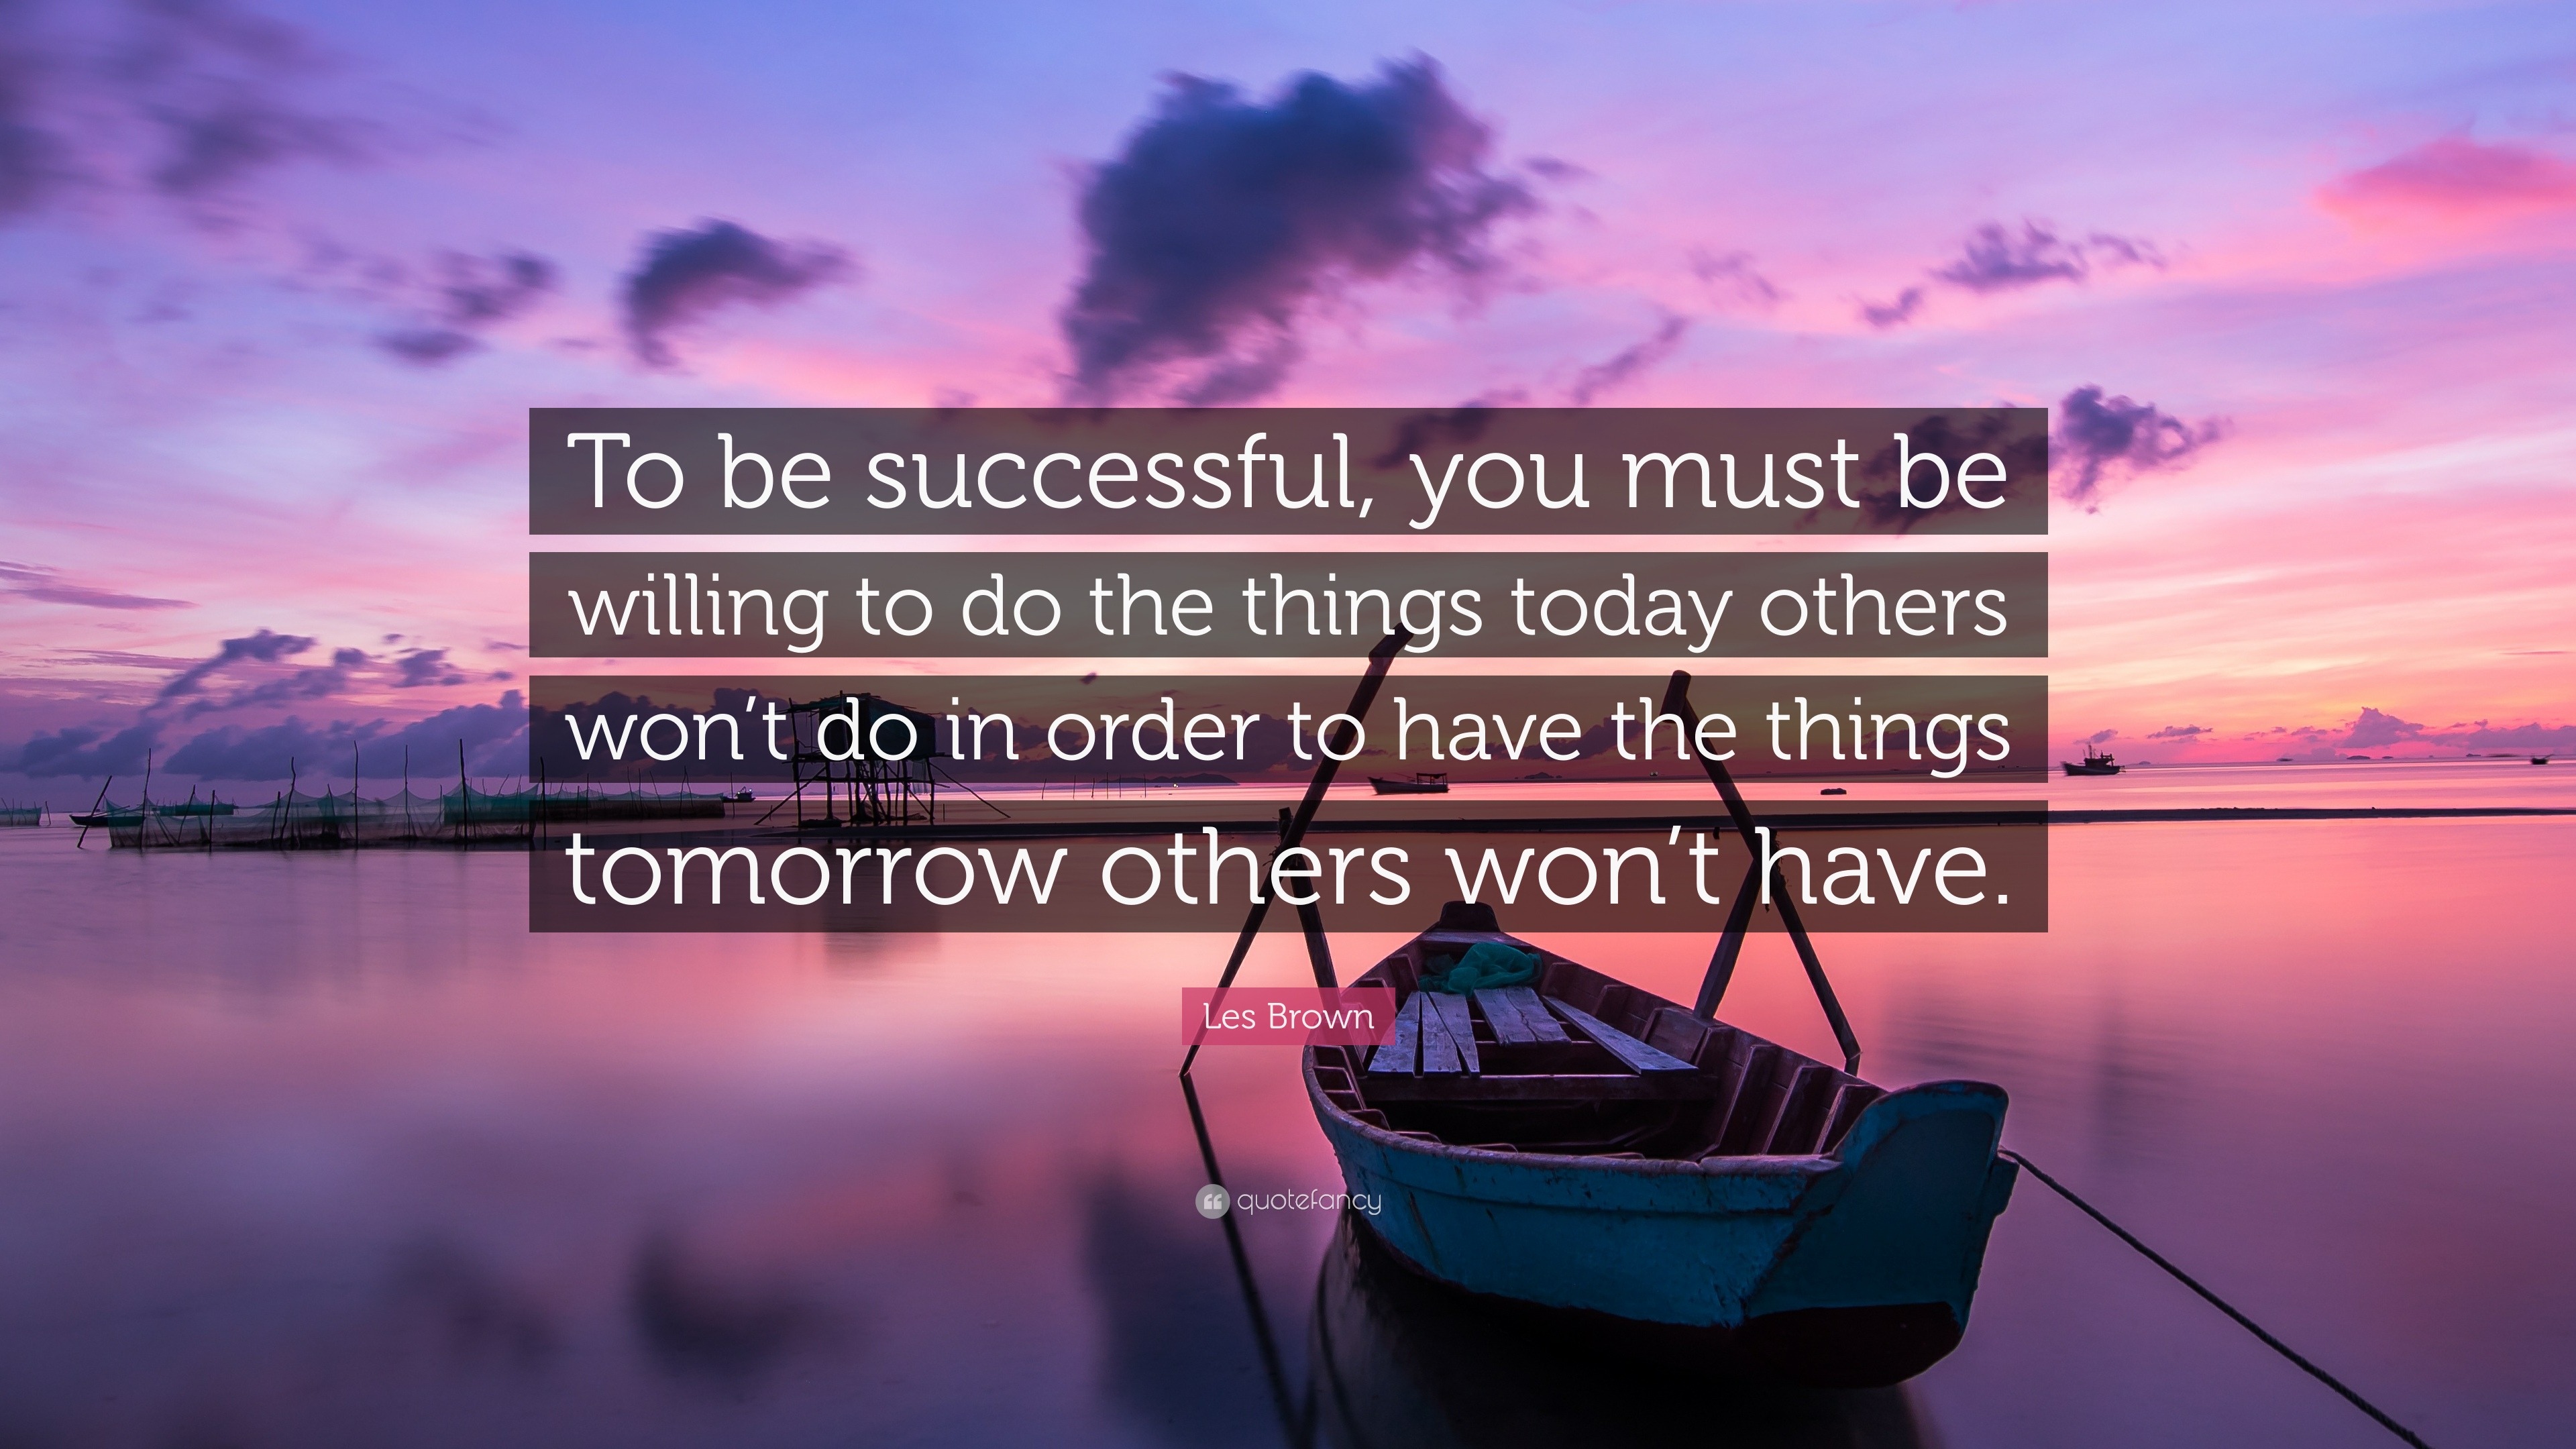 Les Brown Quote   To be  successful  you must be willing to 